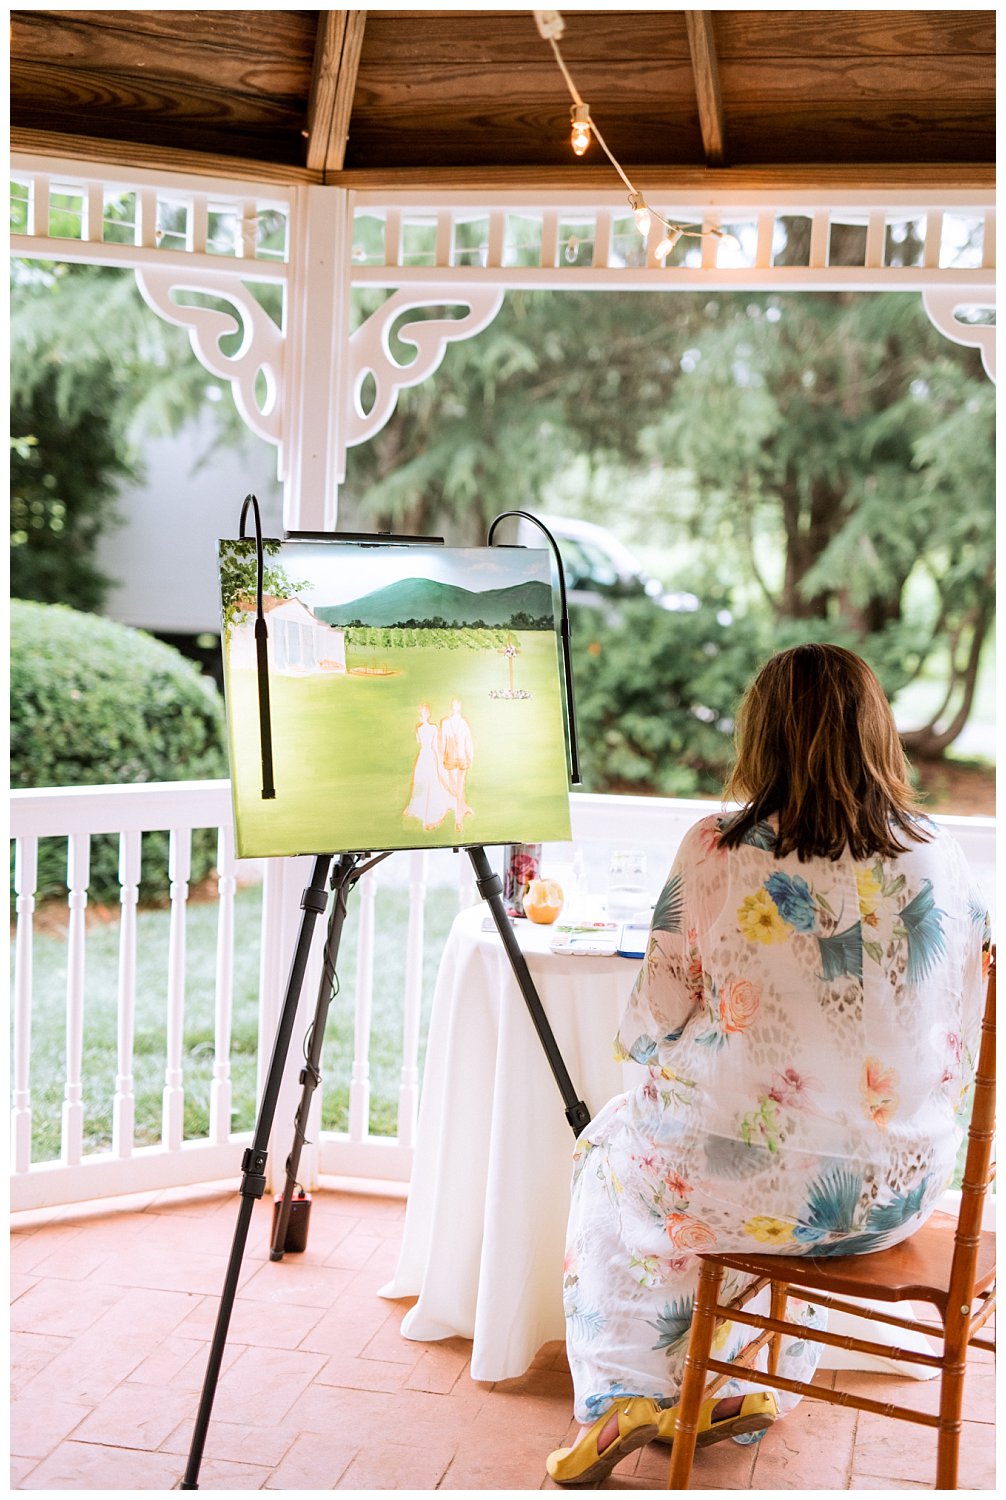 Live painter at a colorful summer wedding in Charlottesville, Virginia